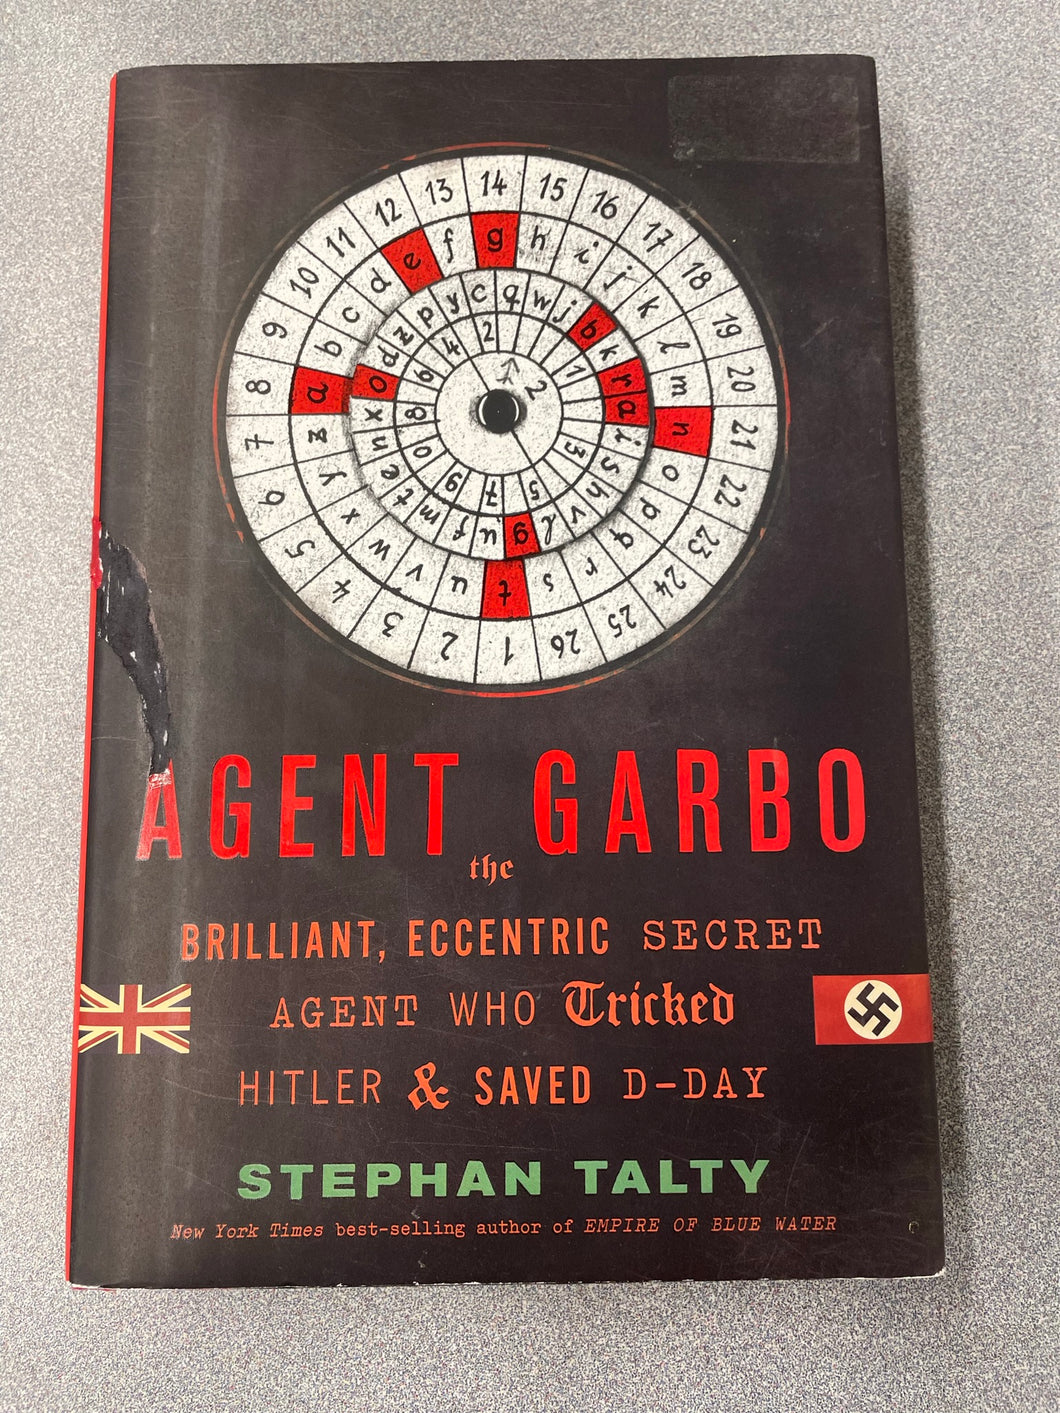 Agent Garbo the Brilliant, Eccentric Secret Agent Who Tricked Hitler and Saved D-Day, Talty, Stephan [2012] AN 8/23